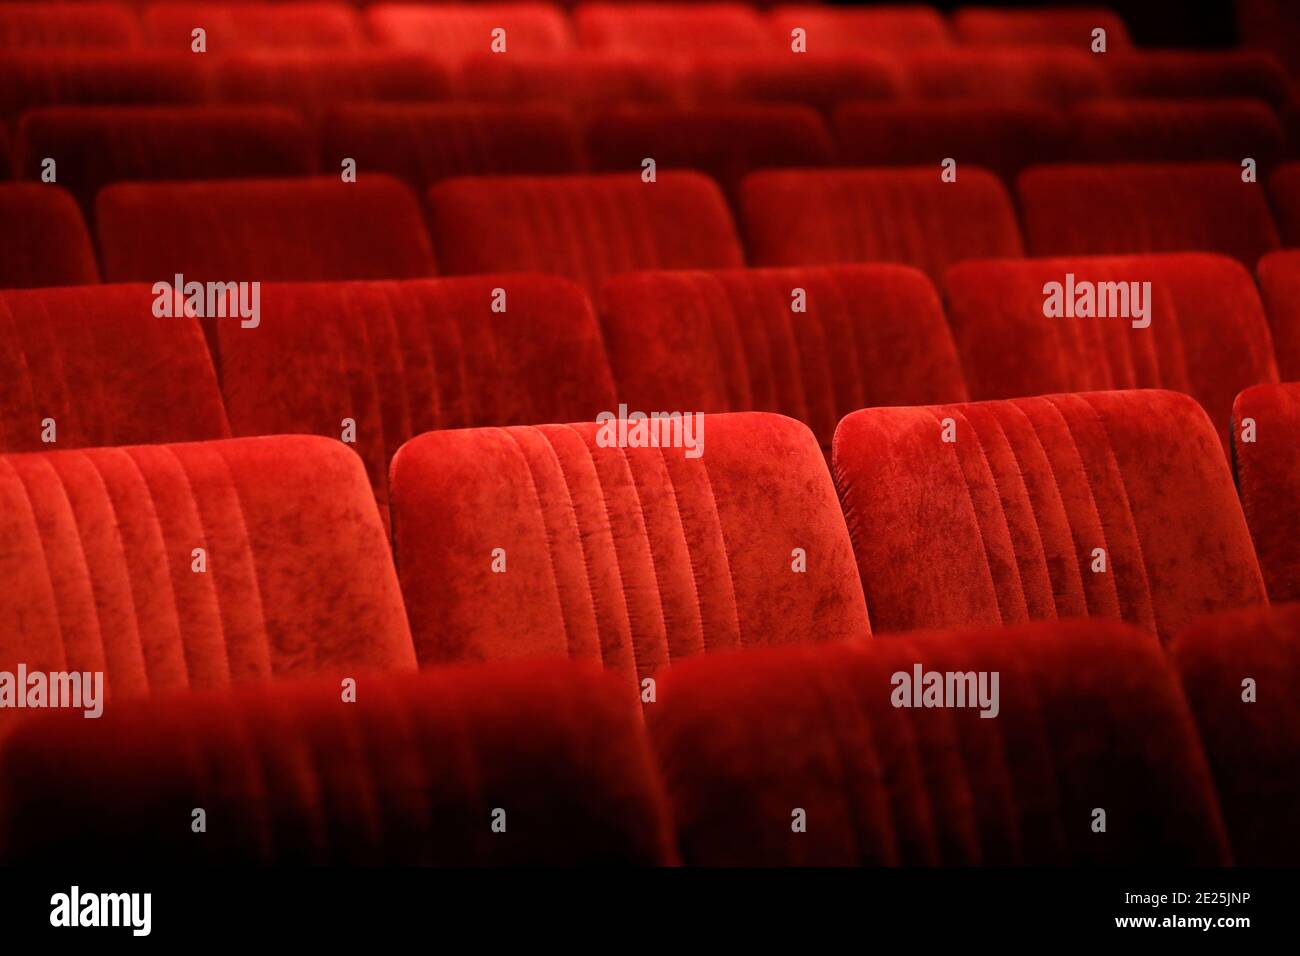 Empty red seats in theater.  Saint Gervais. France. Stock Photo